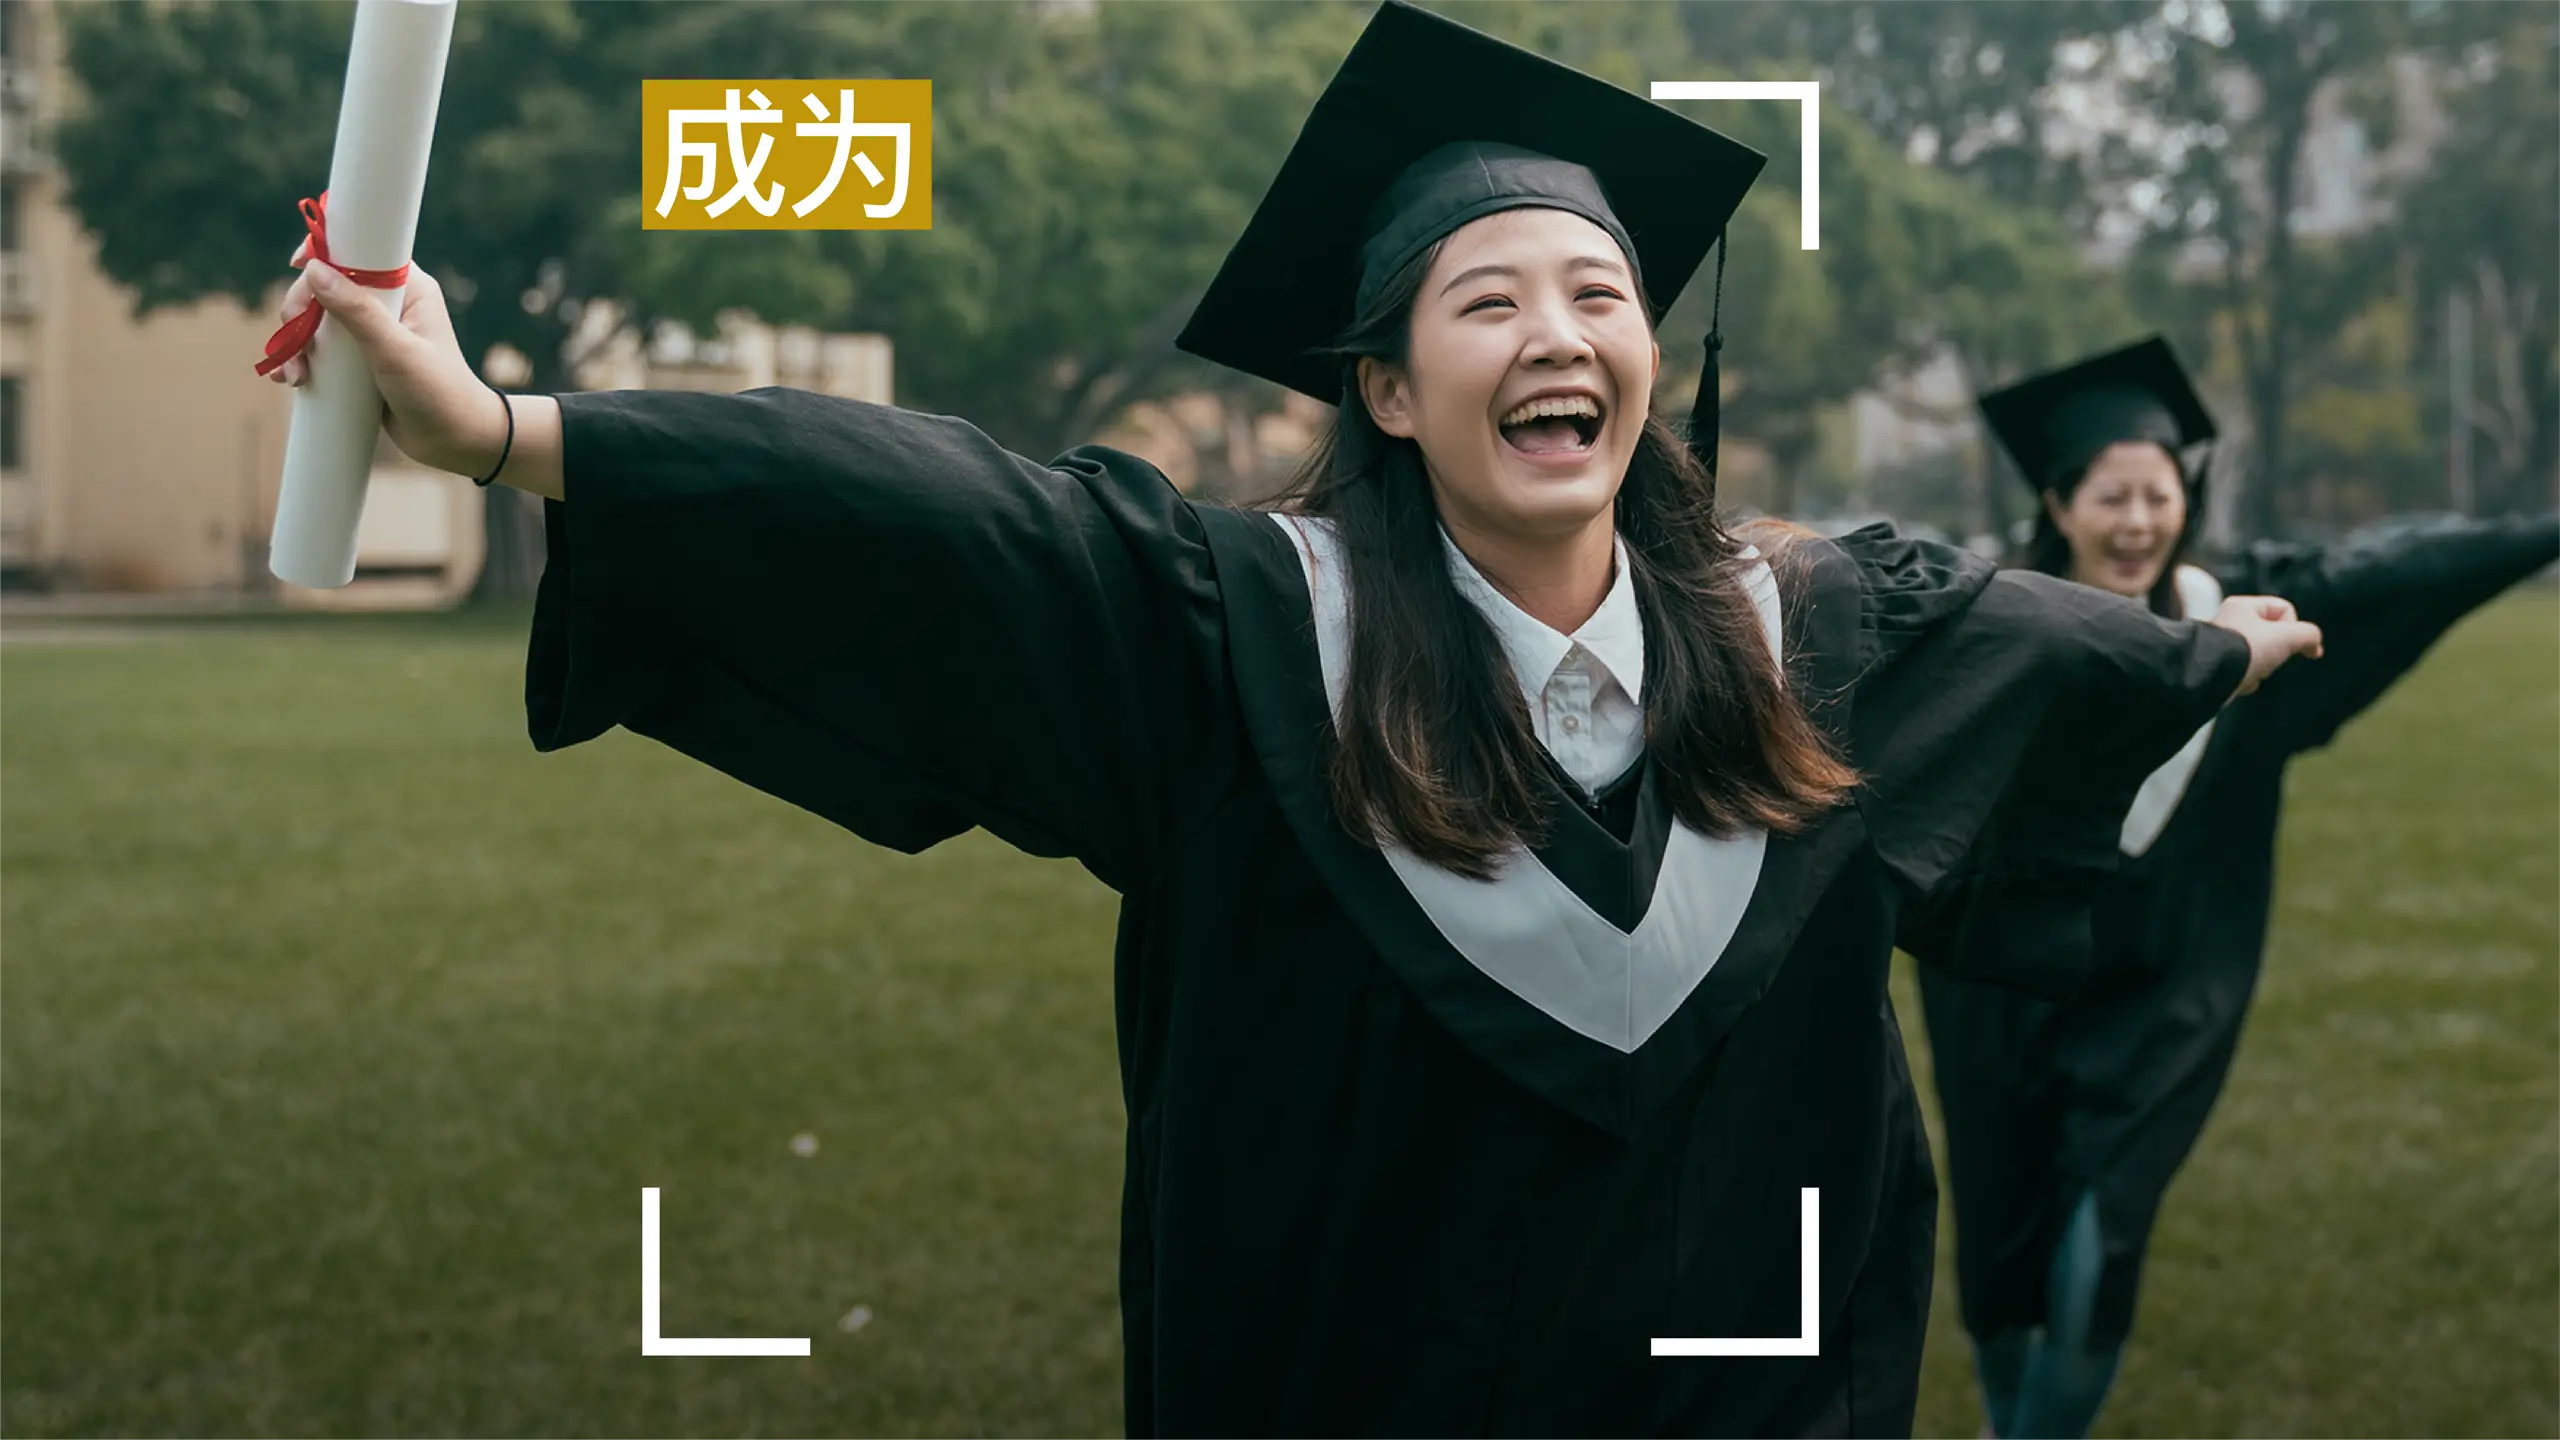 Curtin University 2024 Chinese girl celebrating by running on campus after graduating with degree in her hand